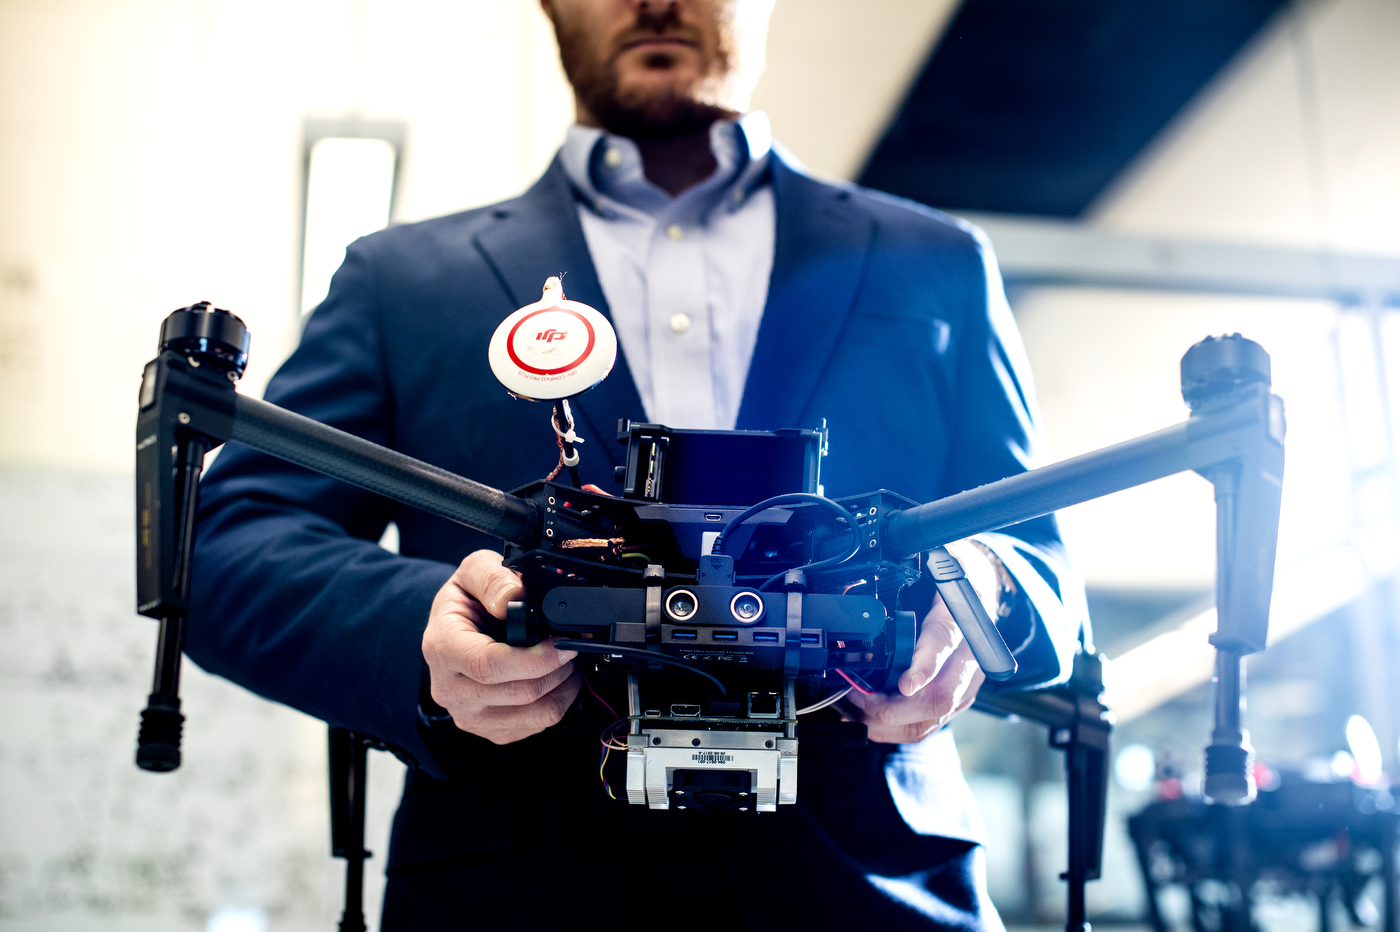 Haner poses with a drone